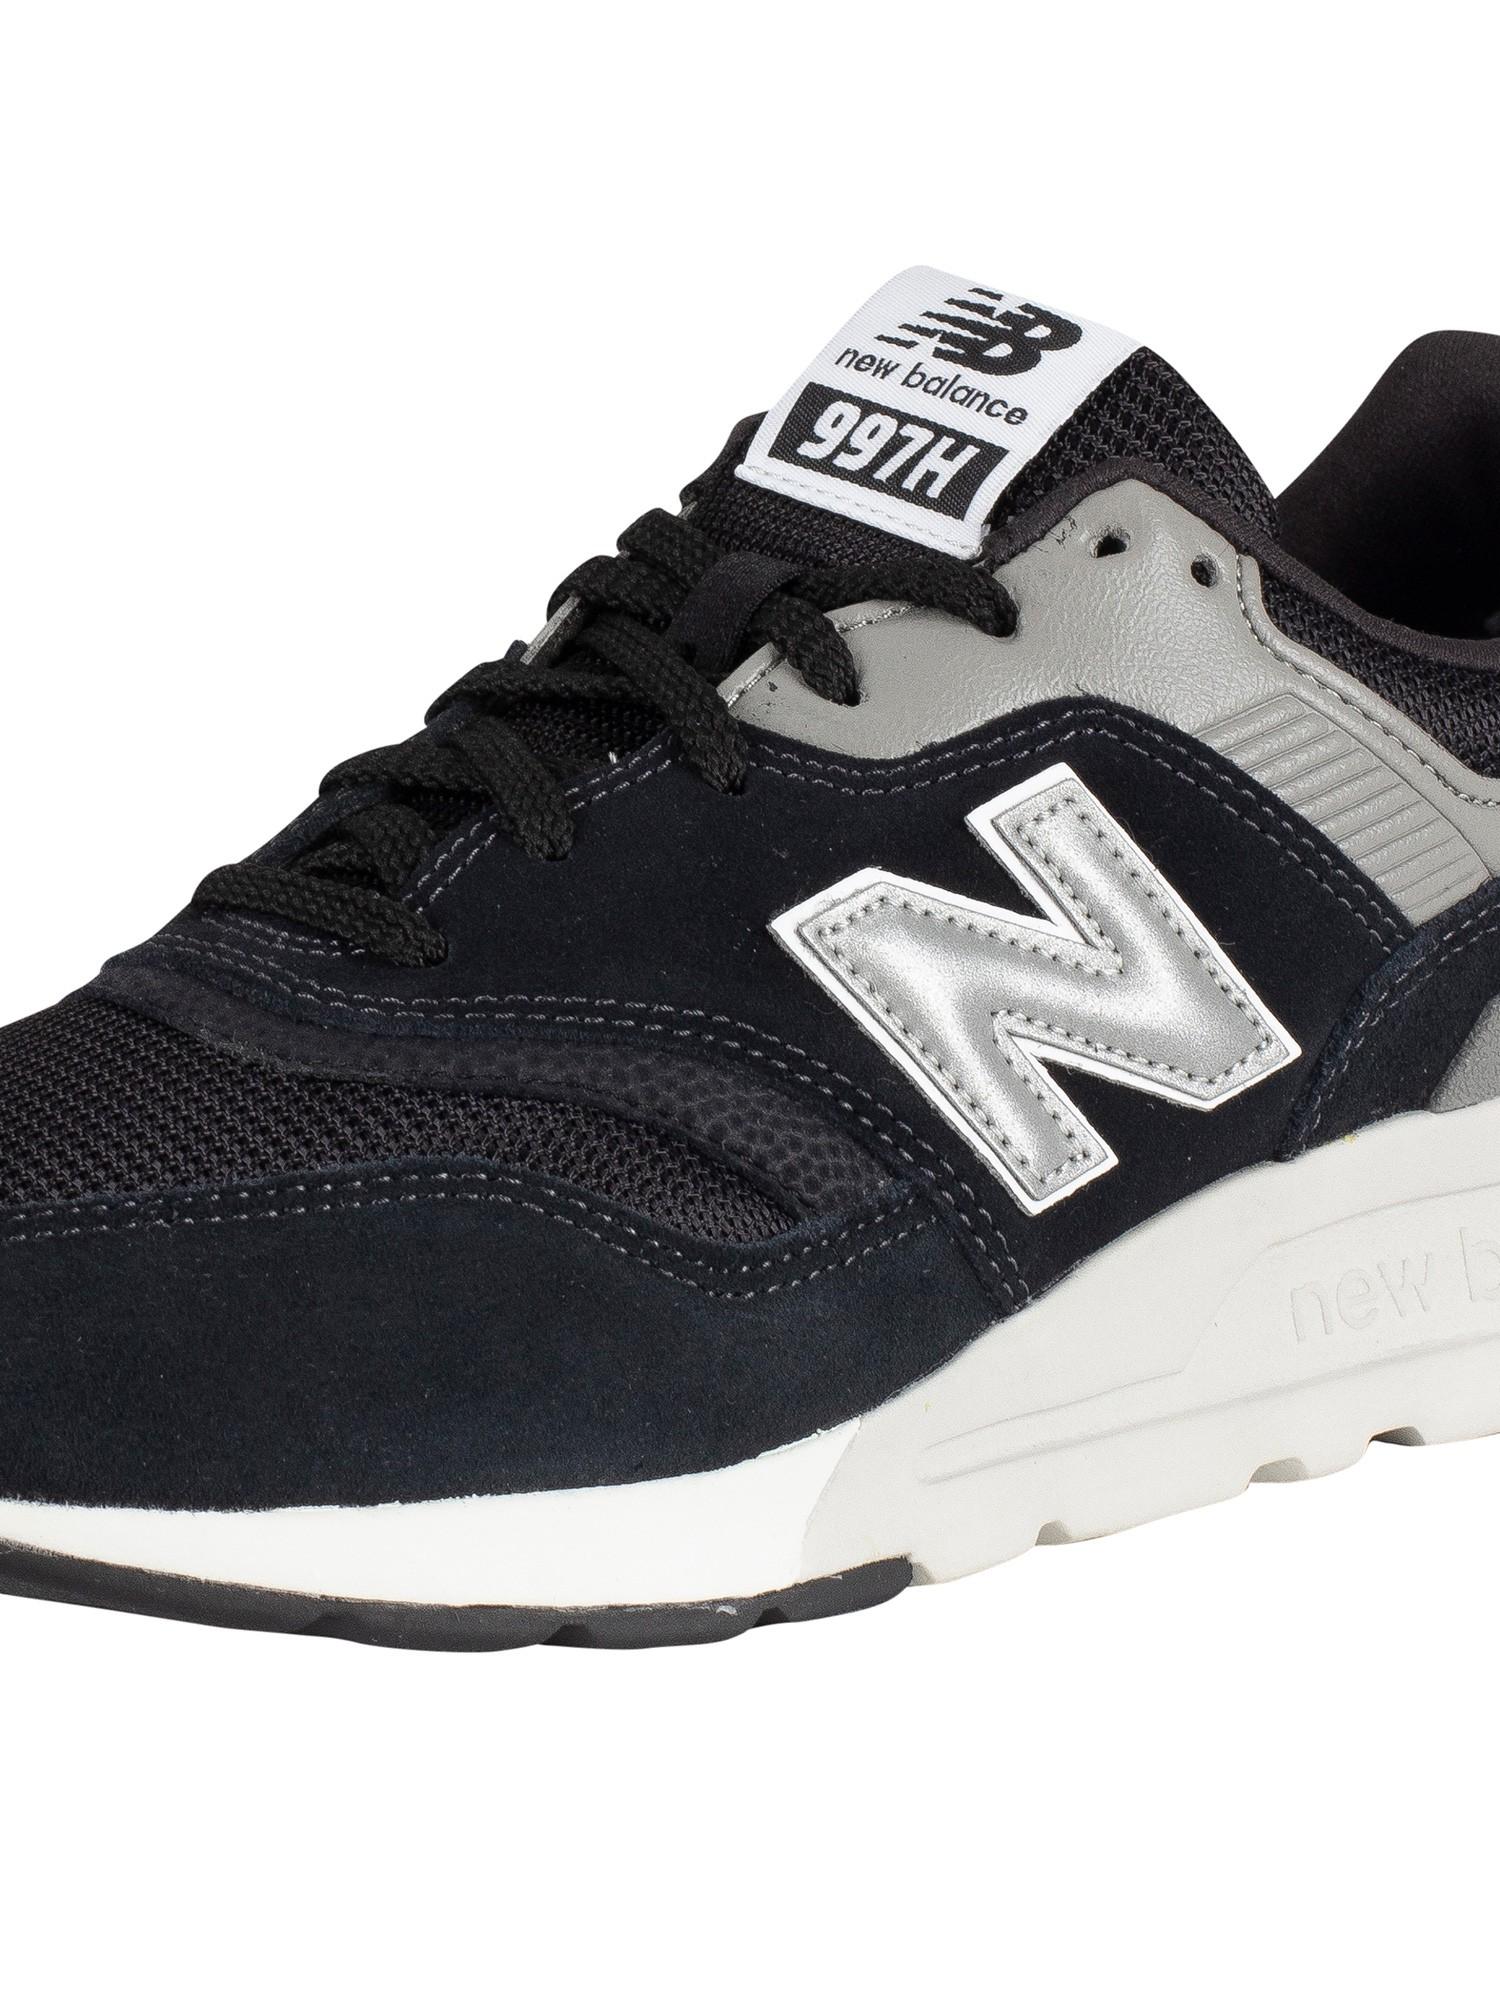 New Balance 977 Suede Trainers in Black 